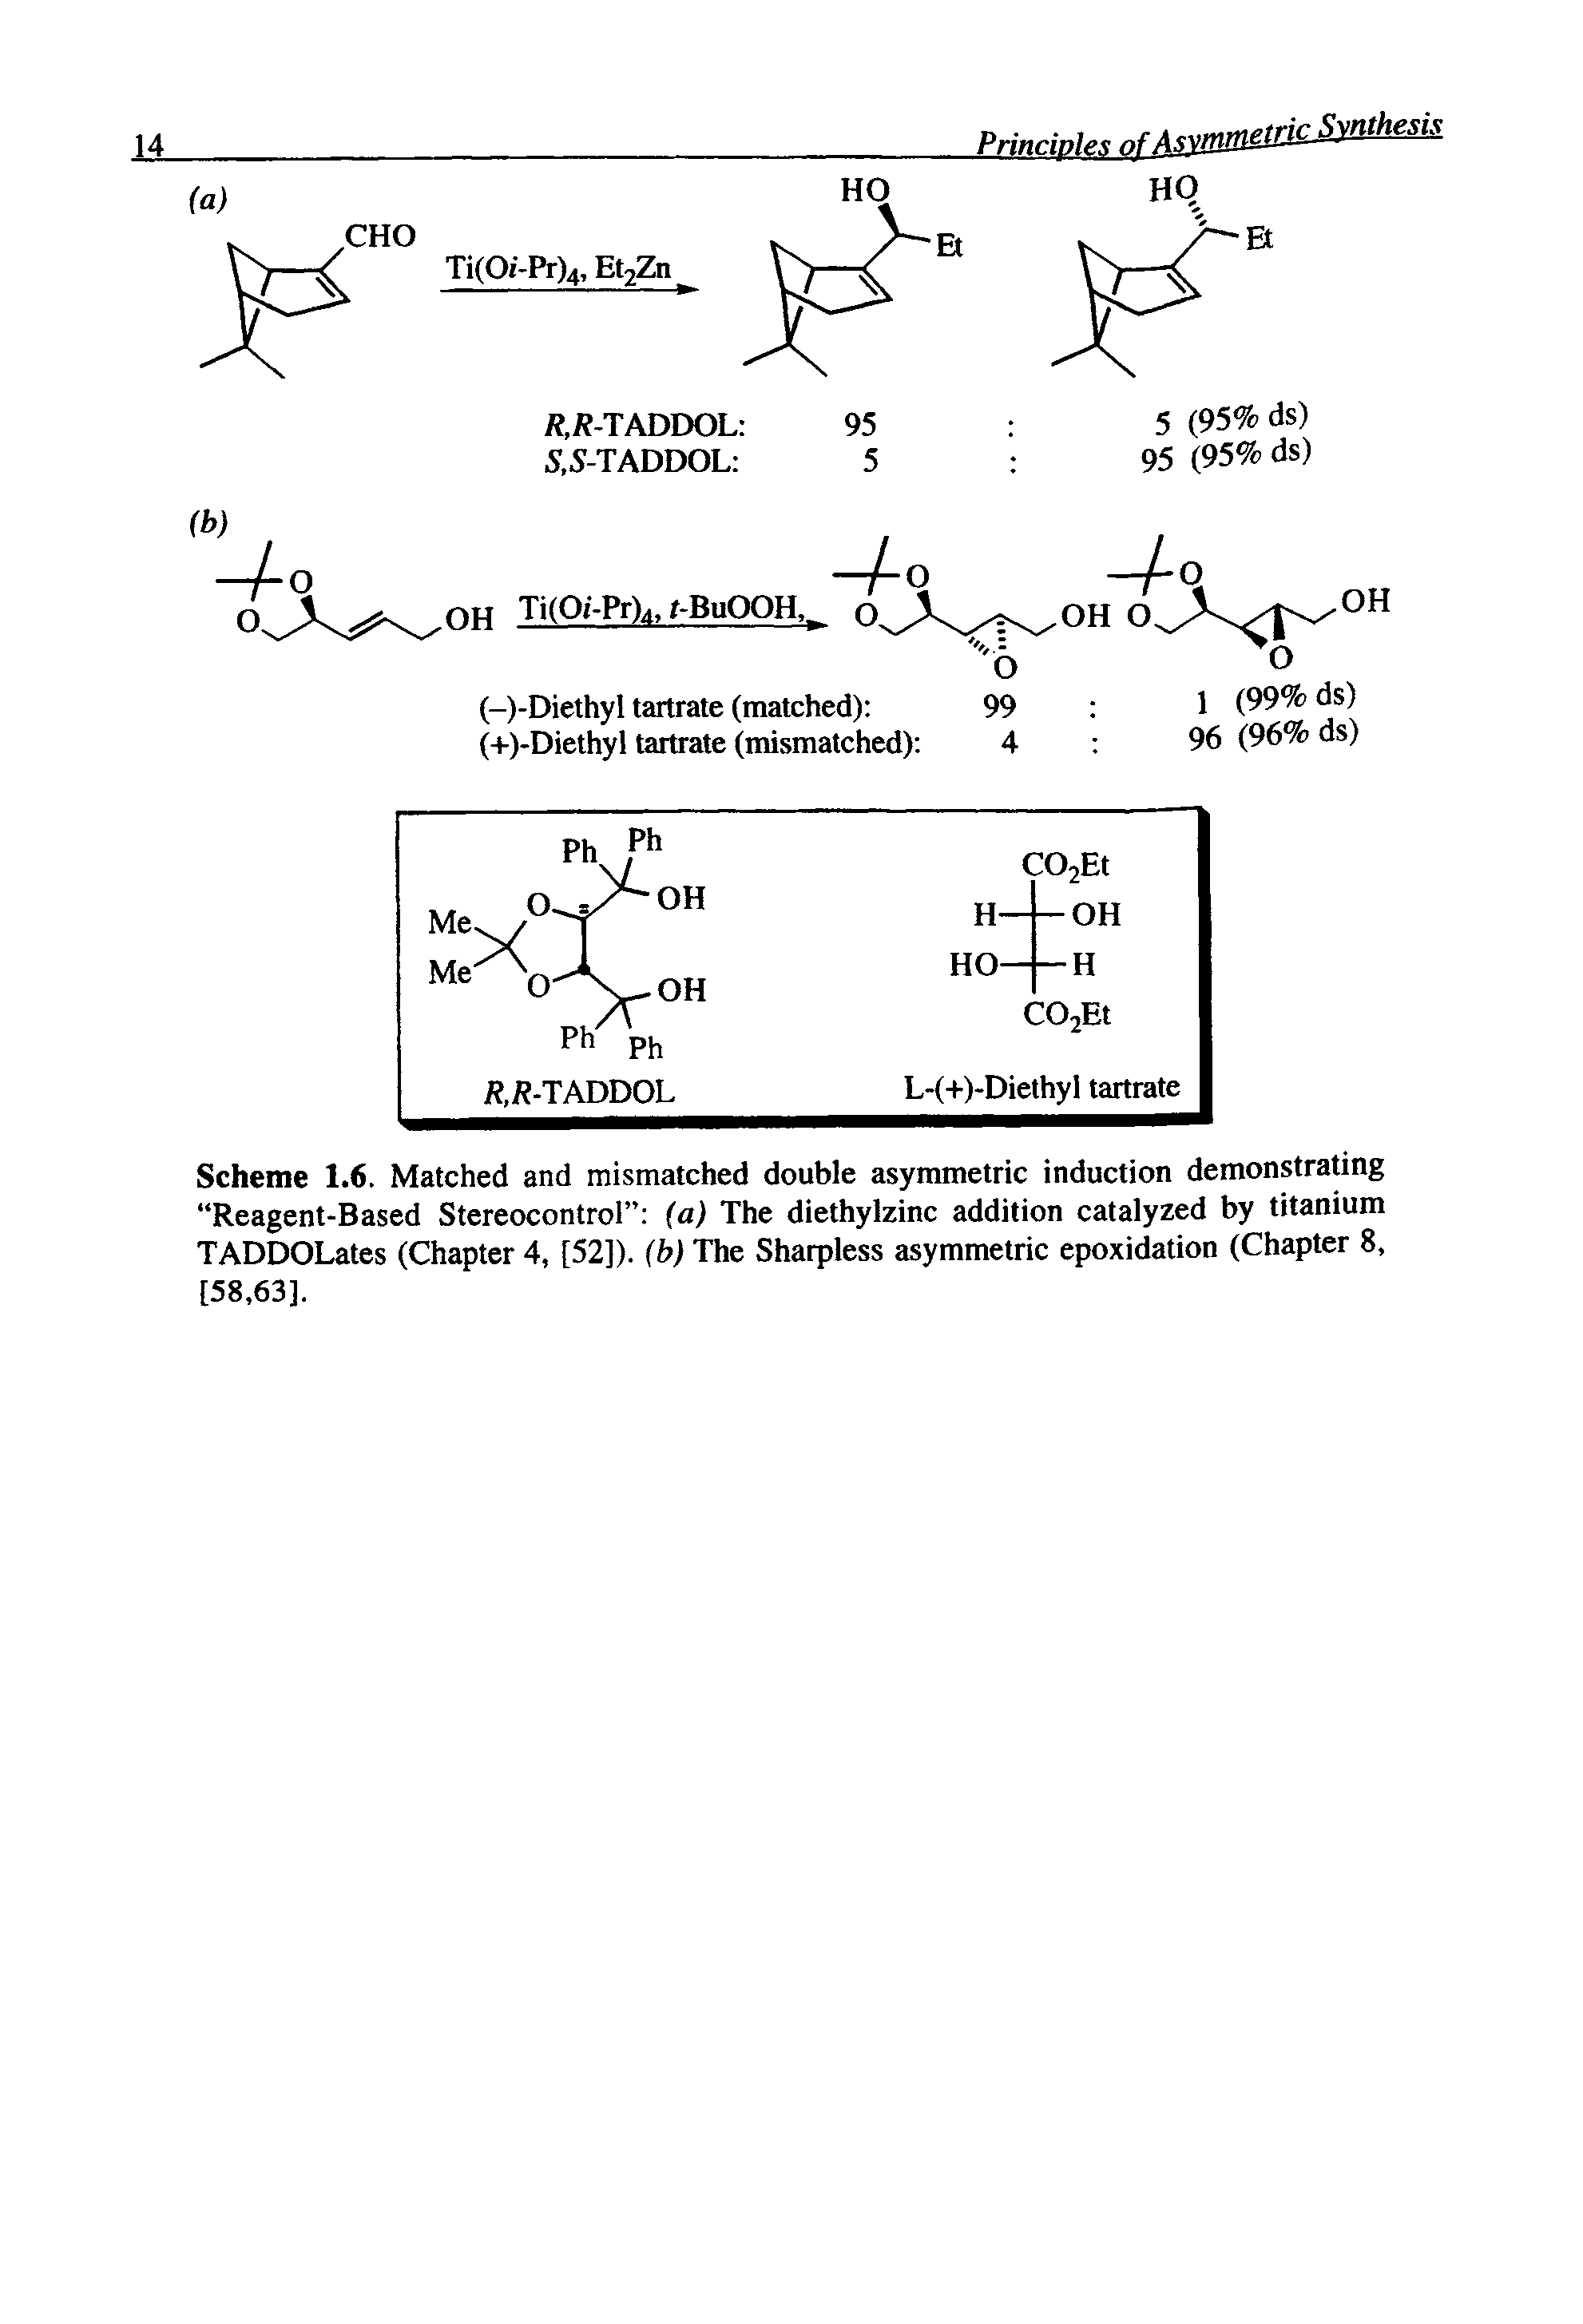 Scheme 1.6. Matched and mismatched double asymmetric induction demonstrating Reagent-Based Stereocontrol (a) The diethylzinc addition catalyzed by titanium TADDOLates (Chapter 4, [52]). (b) The Sharpless asymmetric epoxidation (Chapter 8,...